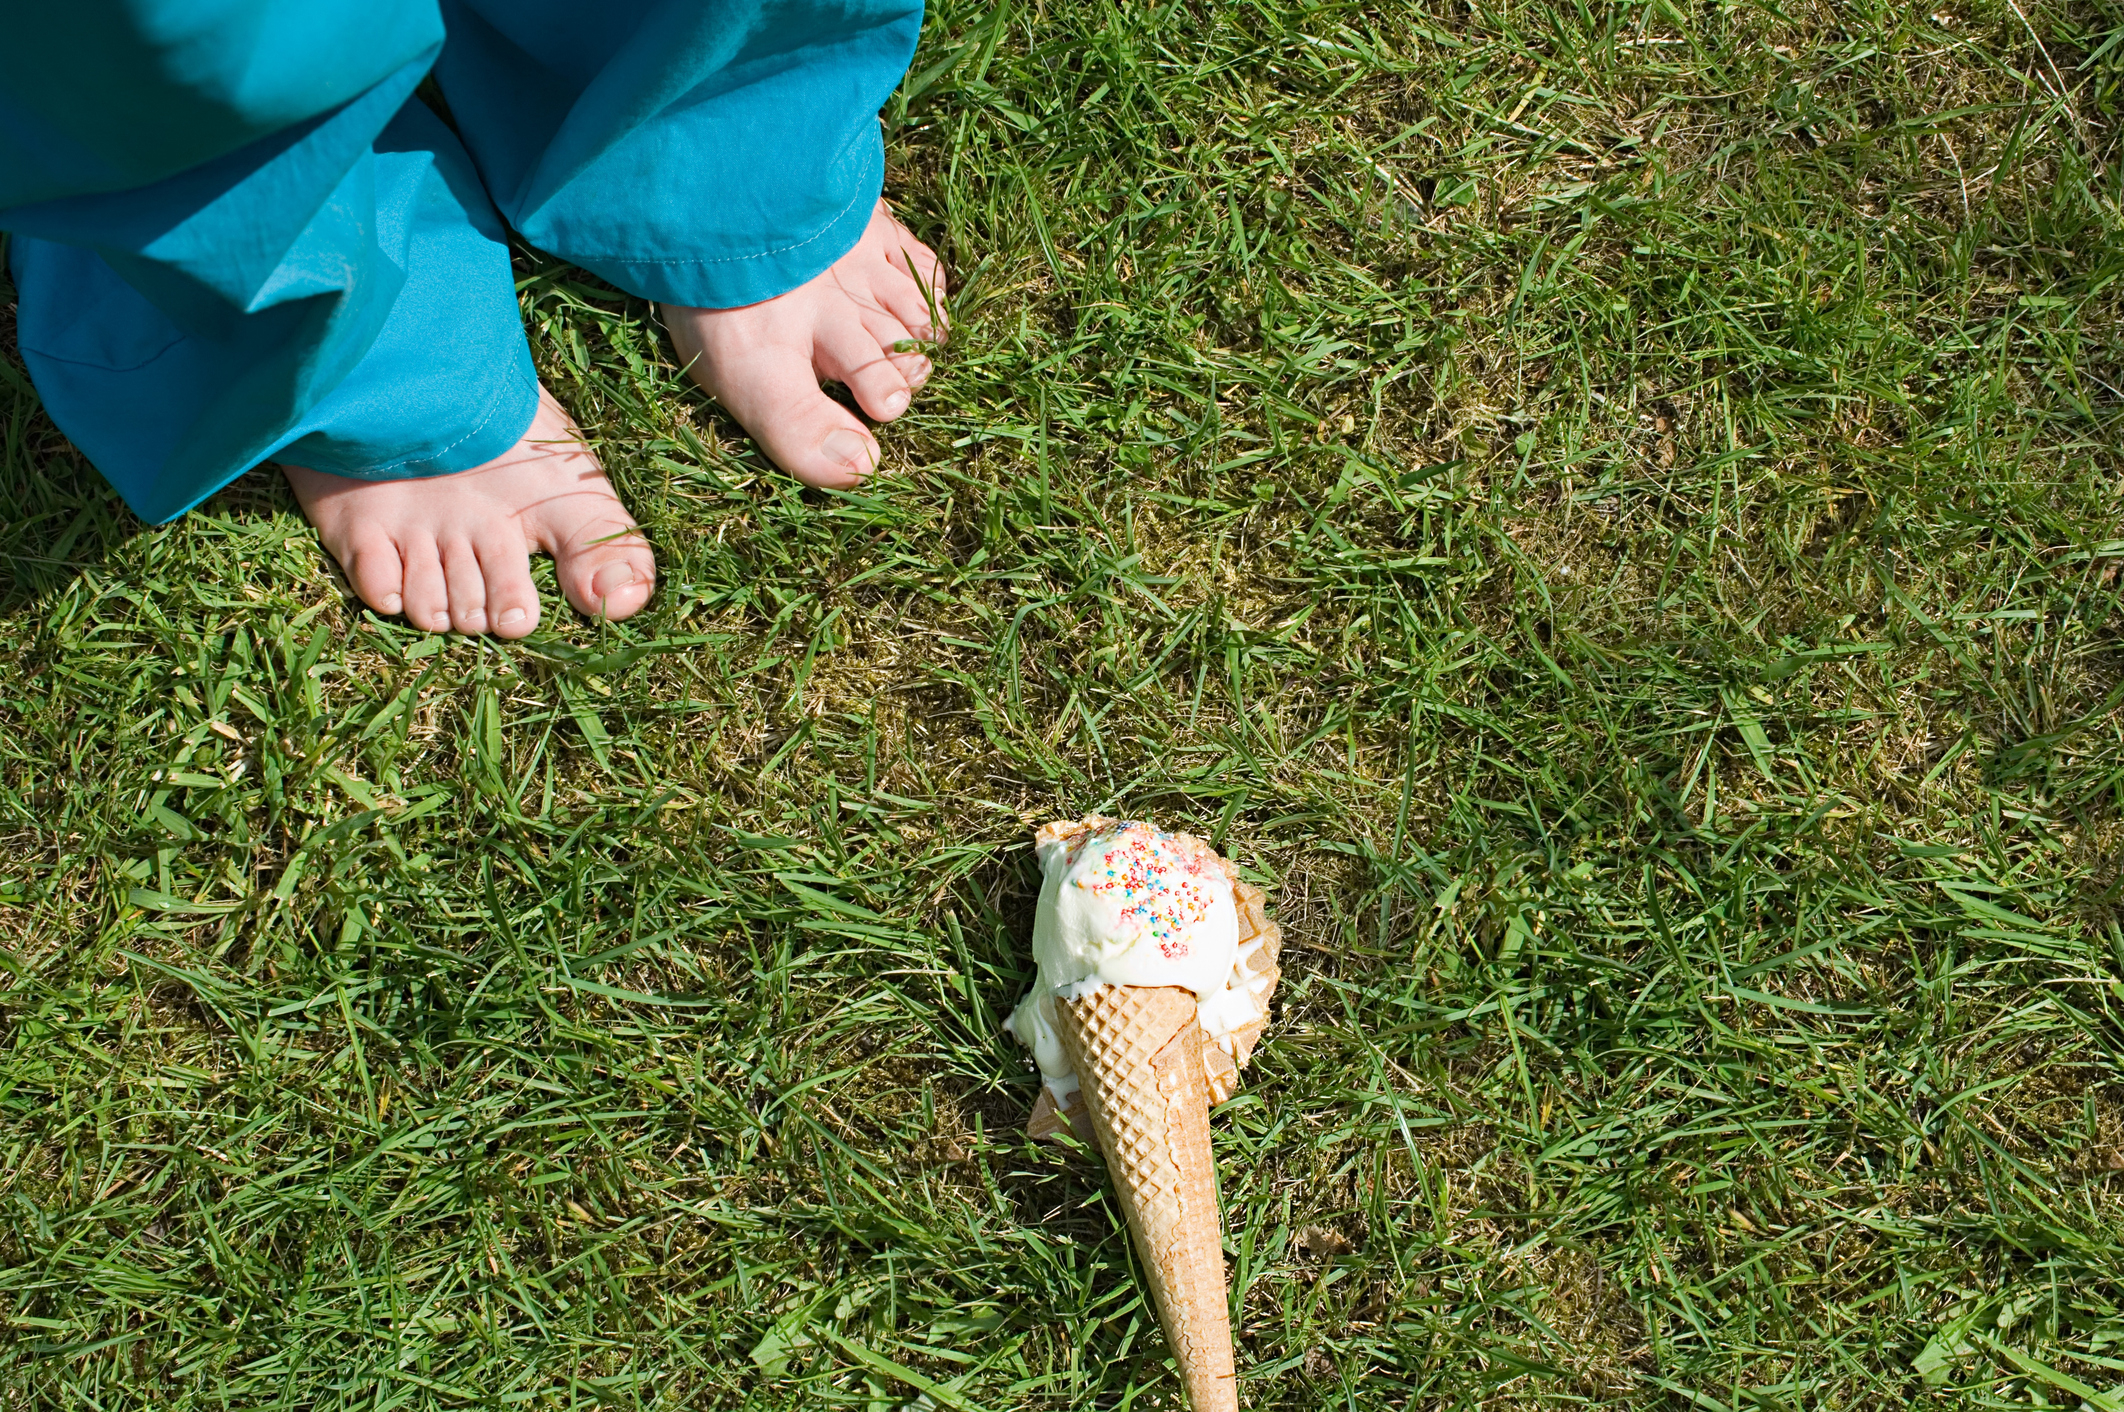 Bare feet next to a dropped ice cream cone on grass, conveying a sense of a small mishap or loss